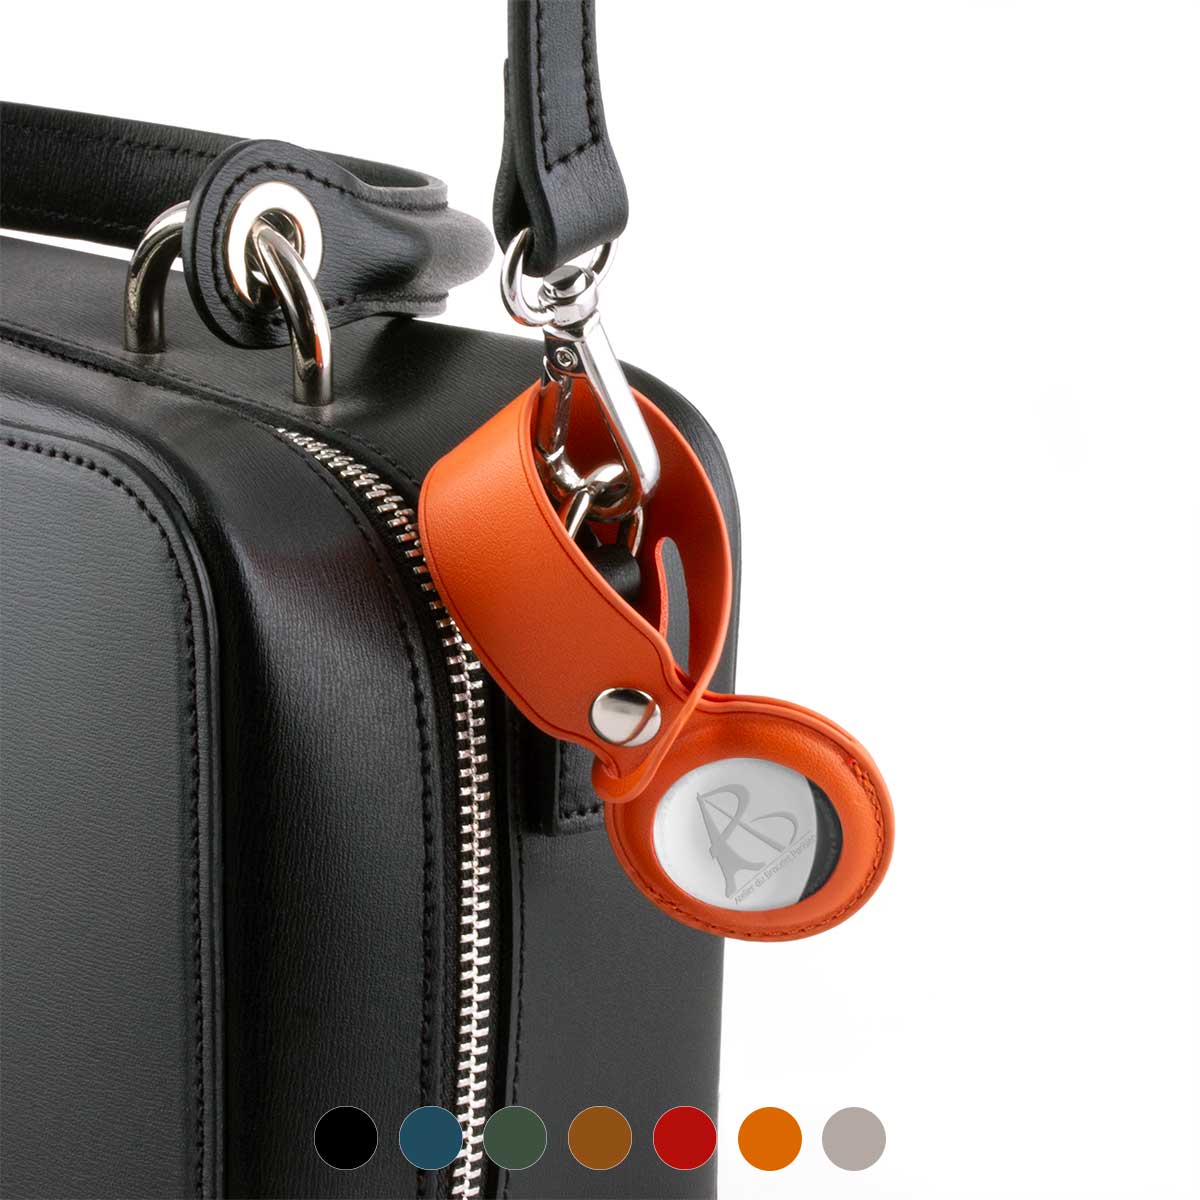 Taupe Brown Silicone AirTag Case with Carabiner Hook